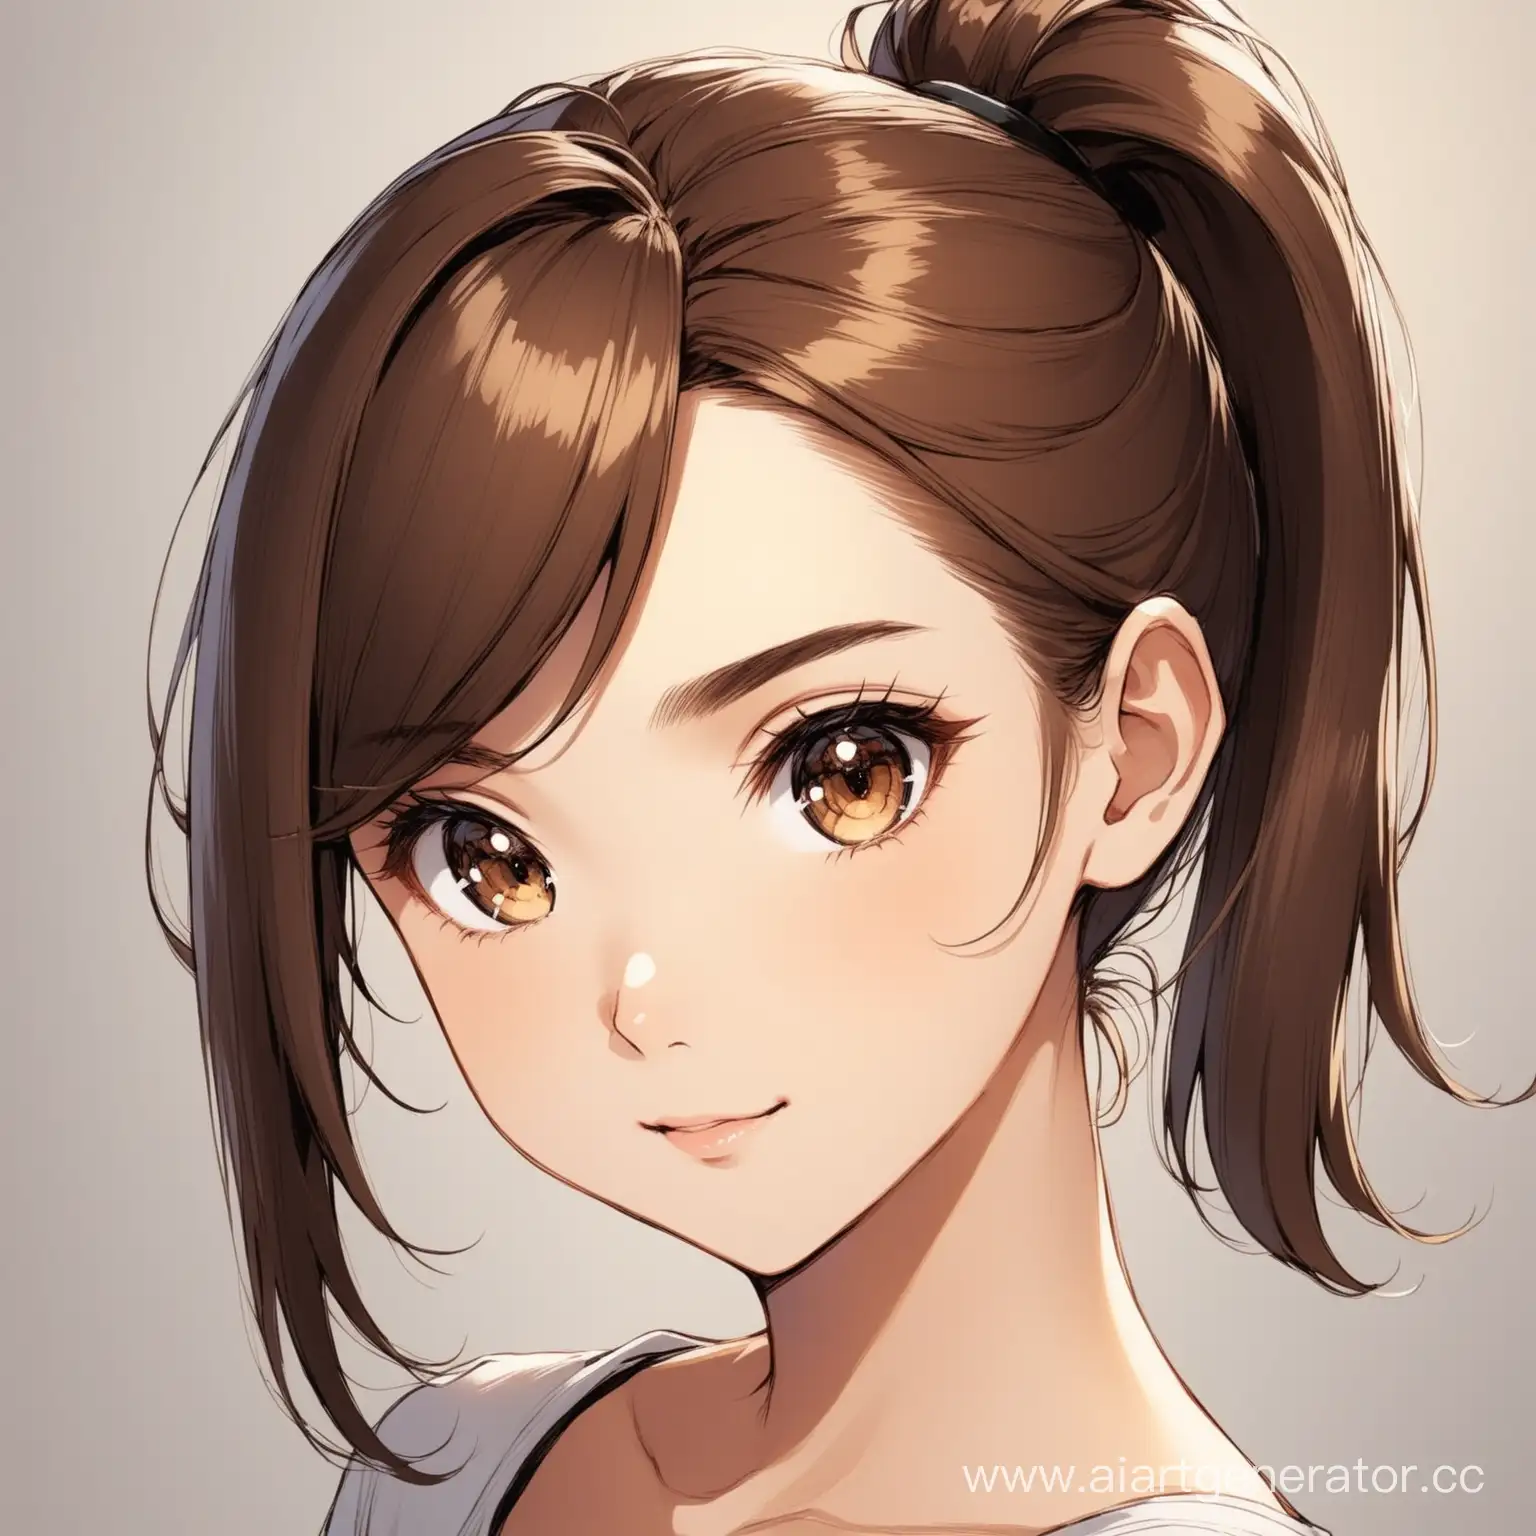 BrownEyed-Girl-with-Ponytail-Hairstyle